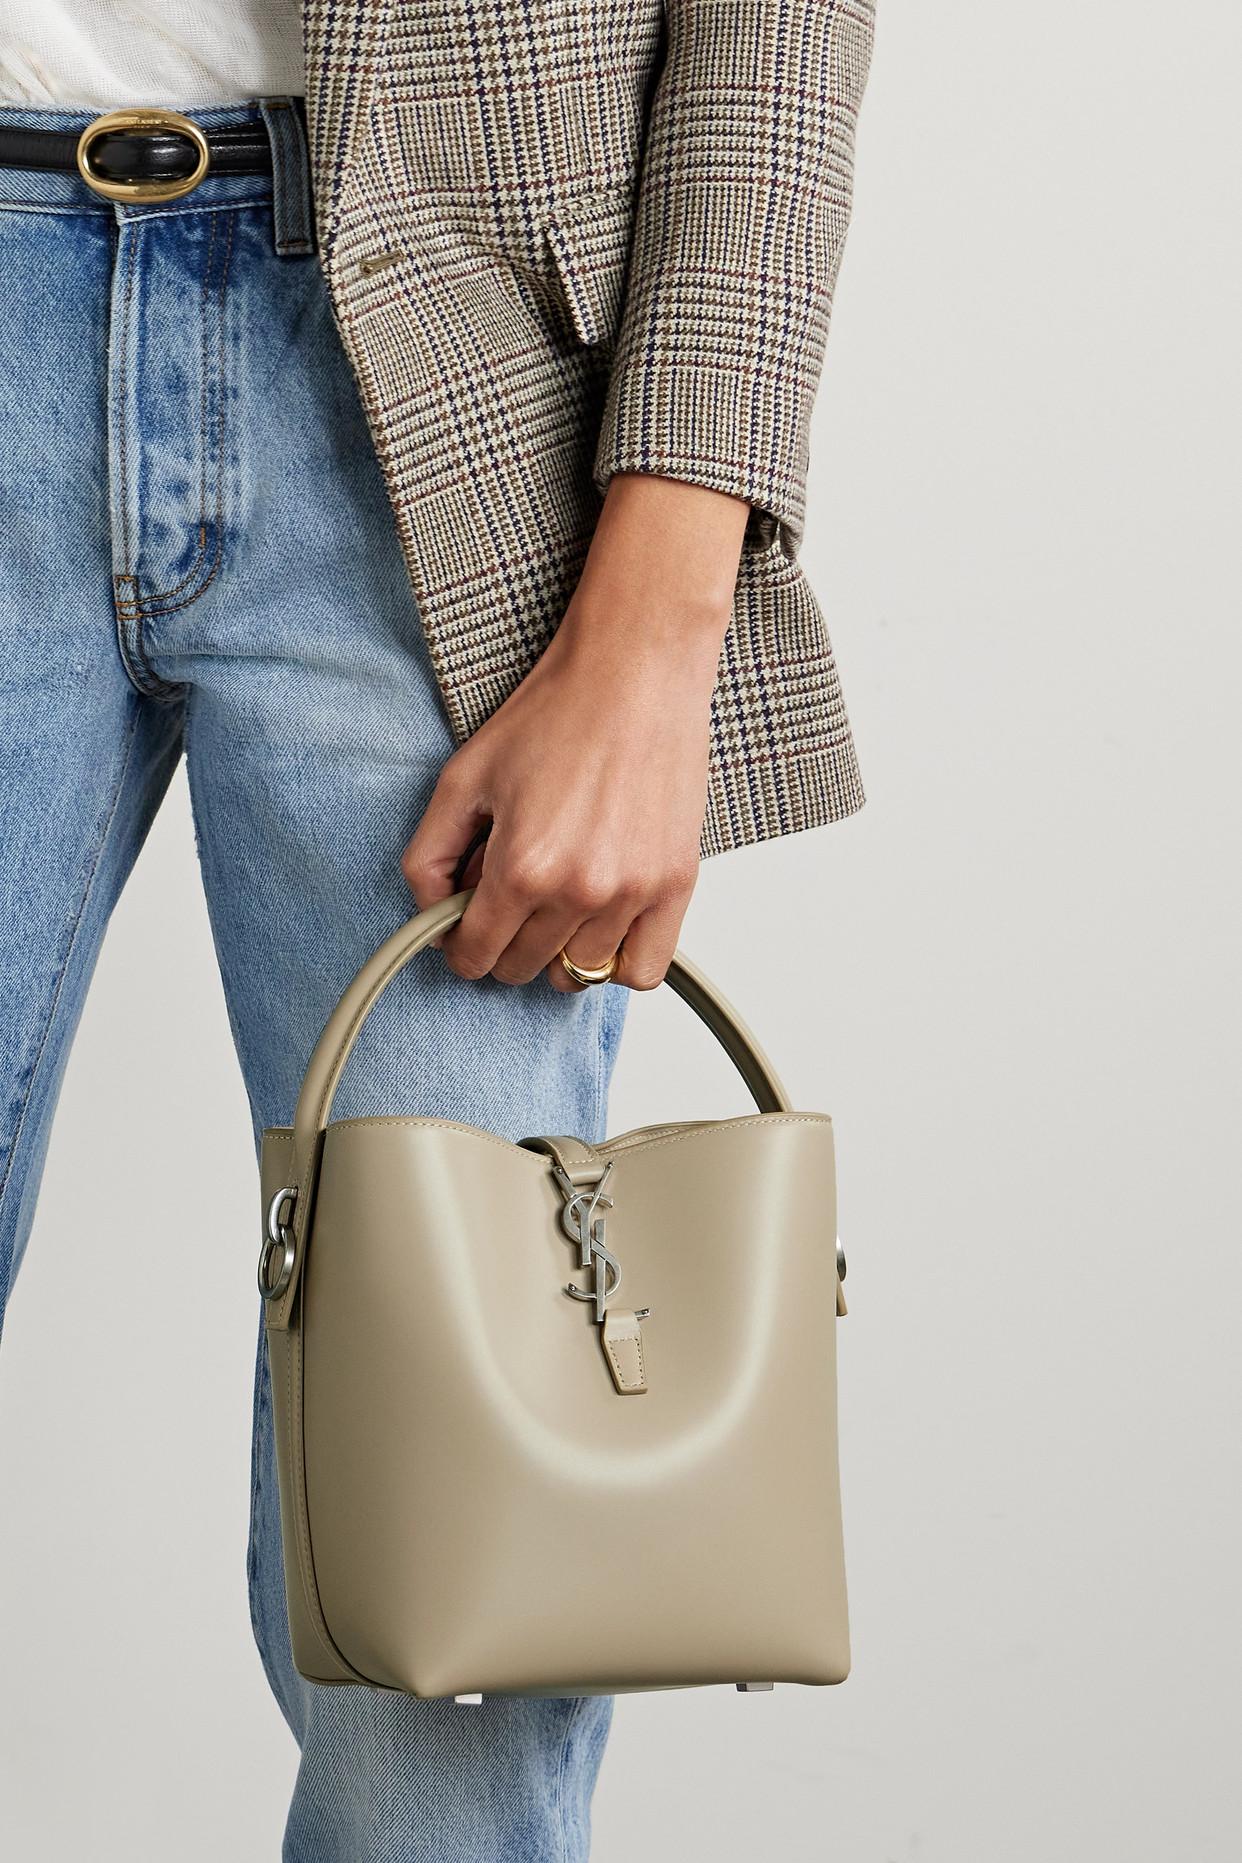 Saint Laurent Le 37 Small Leather Bucket Bag in Natural | Lyst